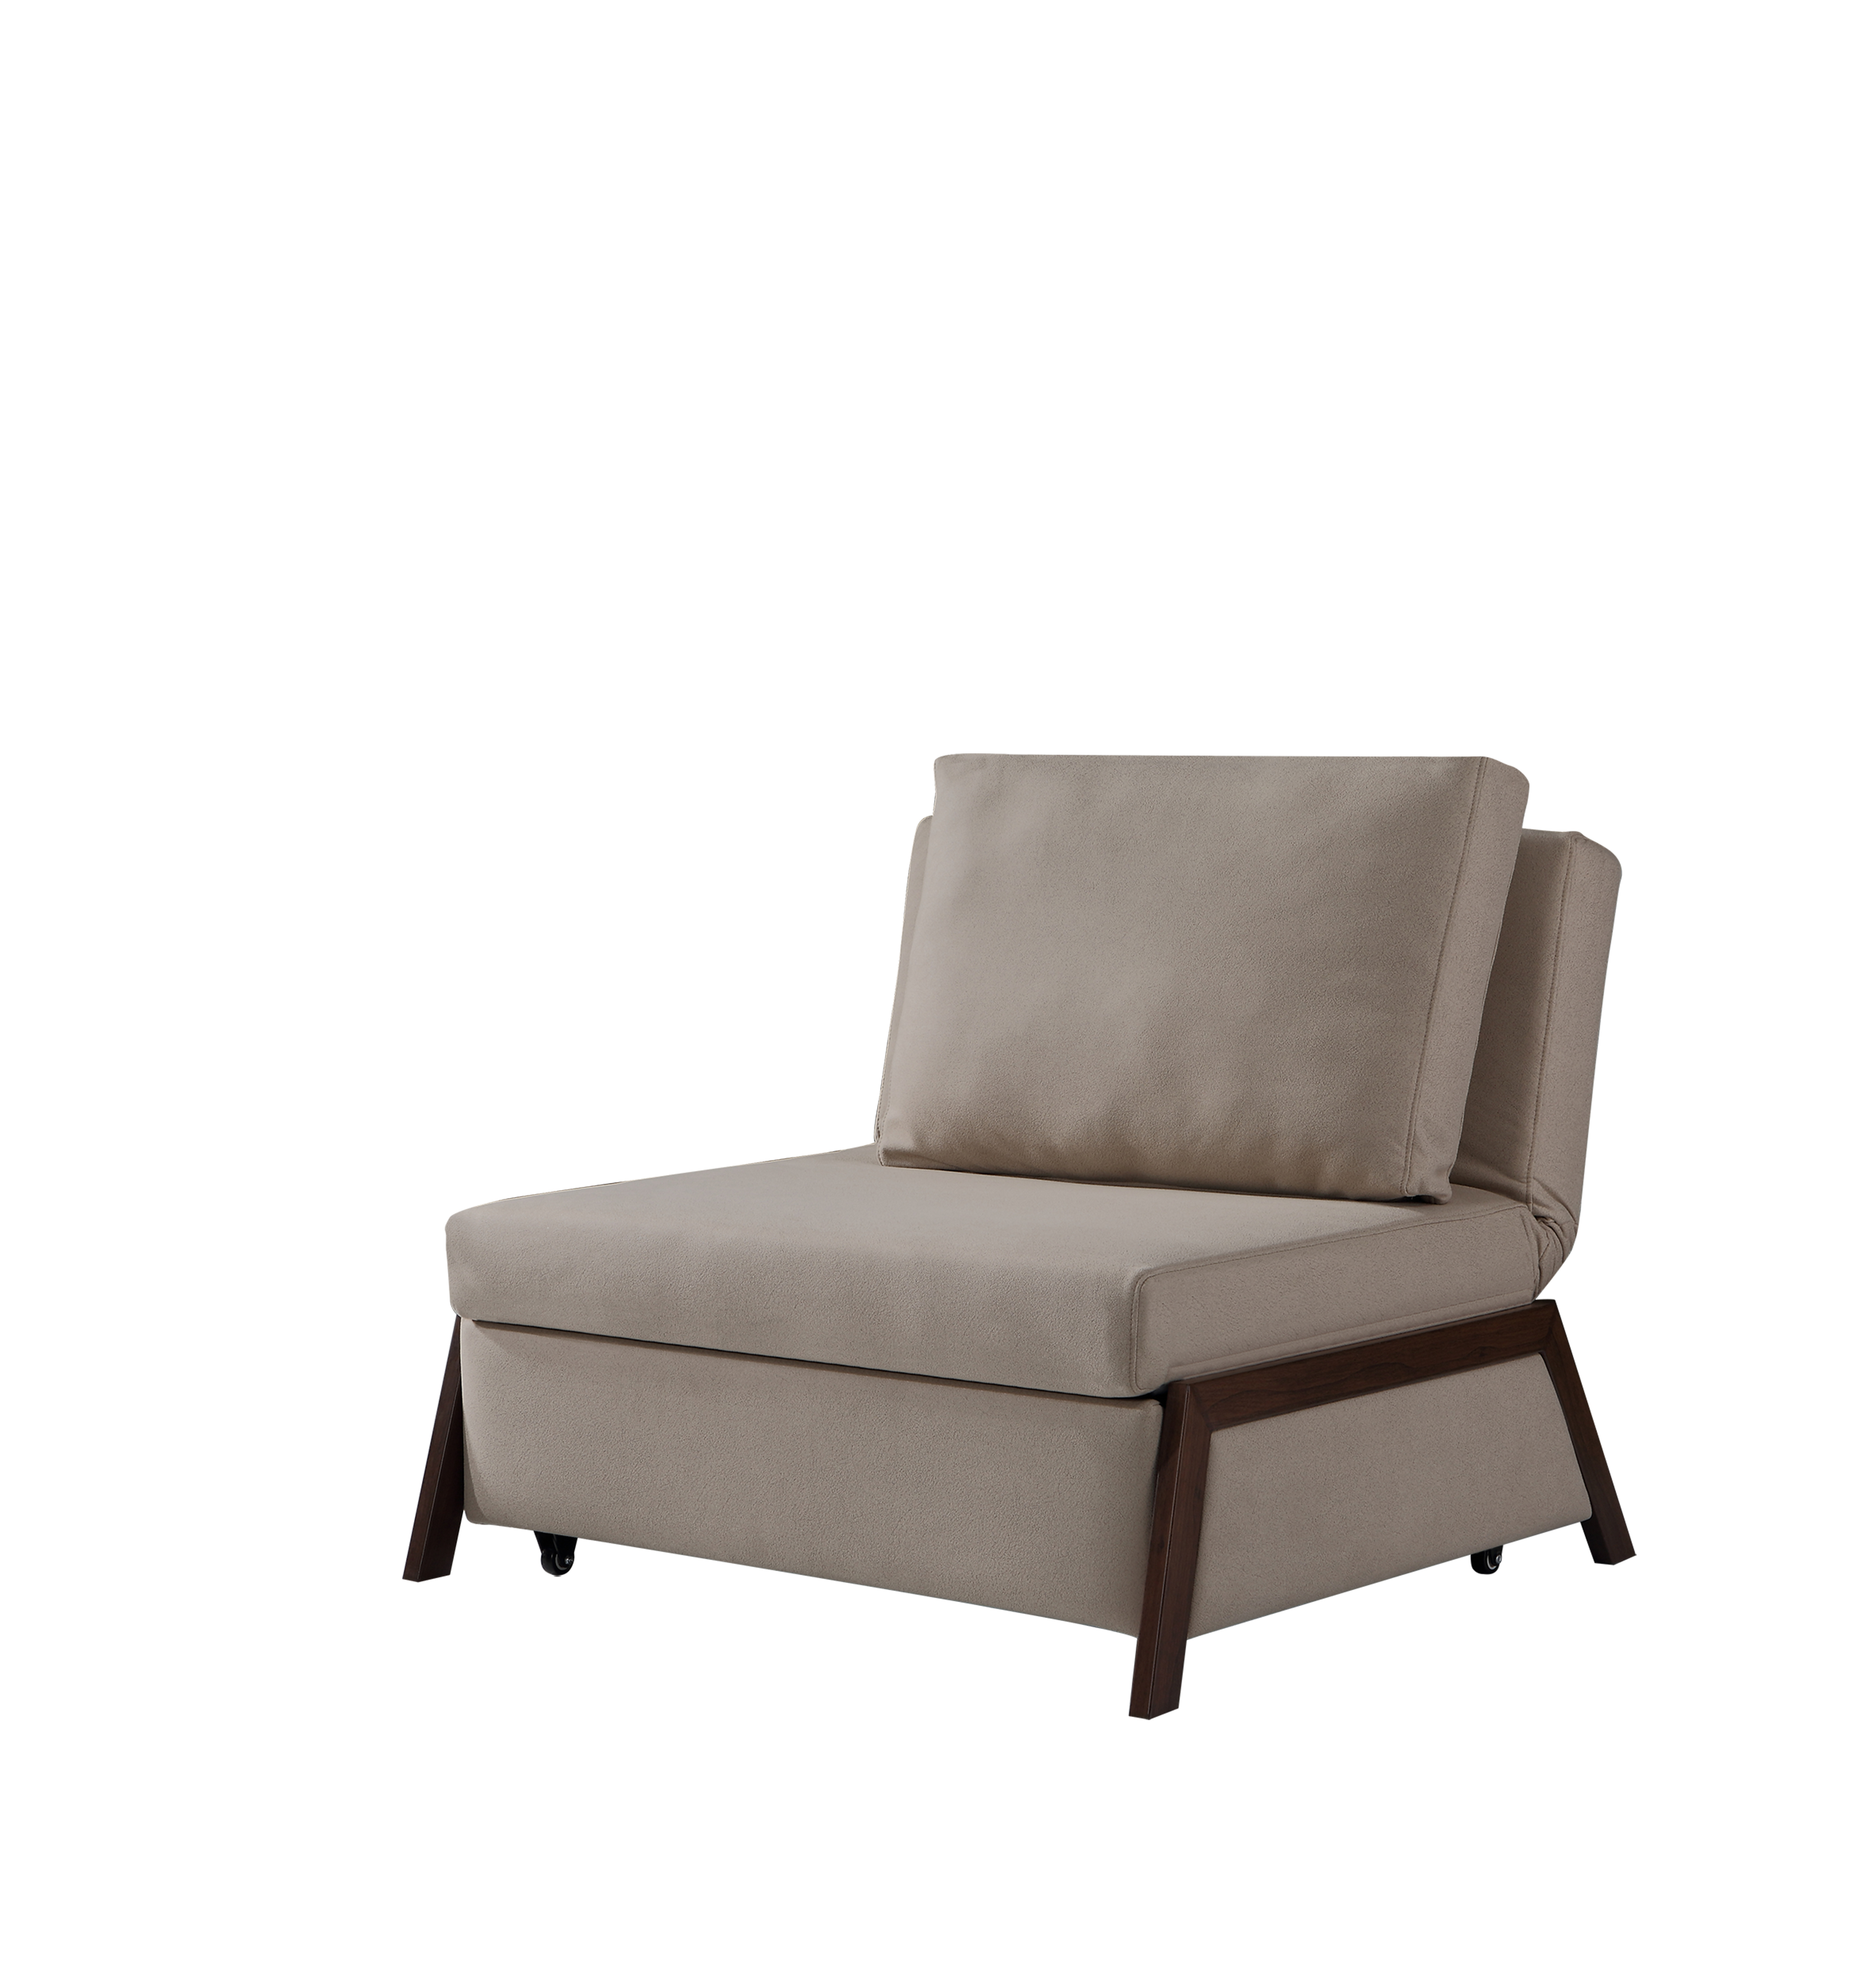 Hot Selling Foldable Sofabed OM-6030